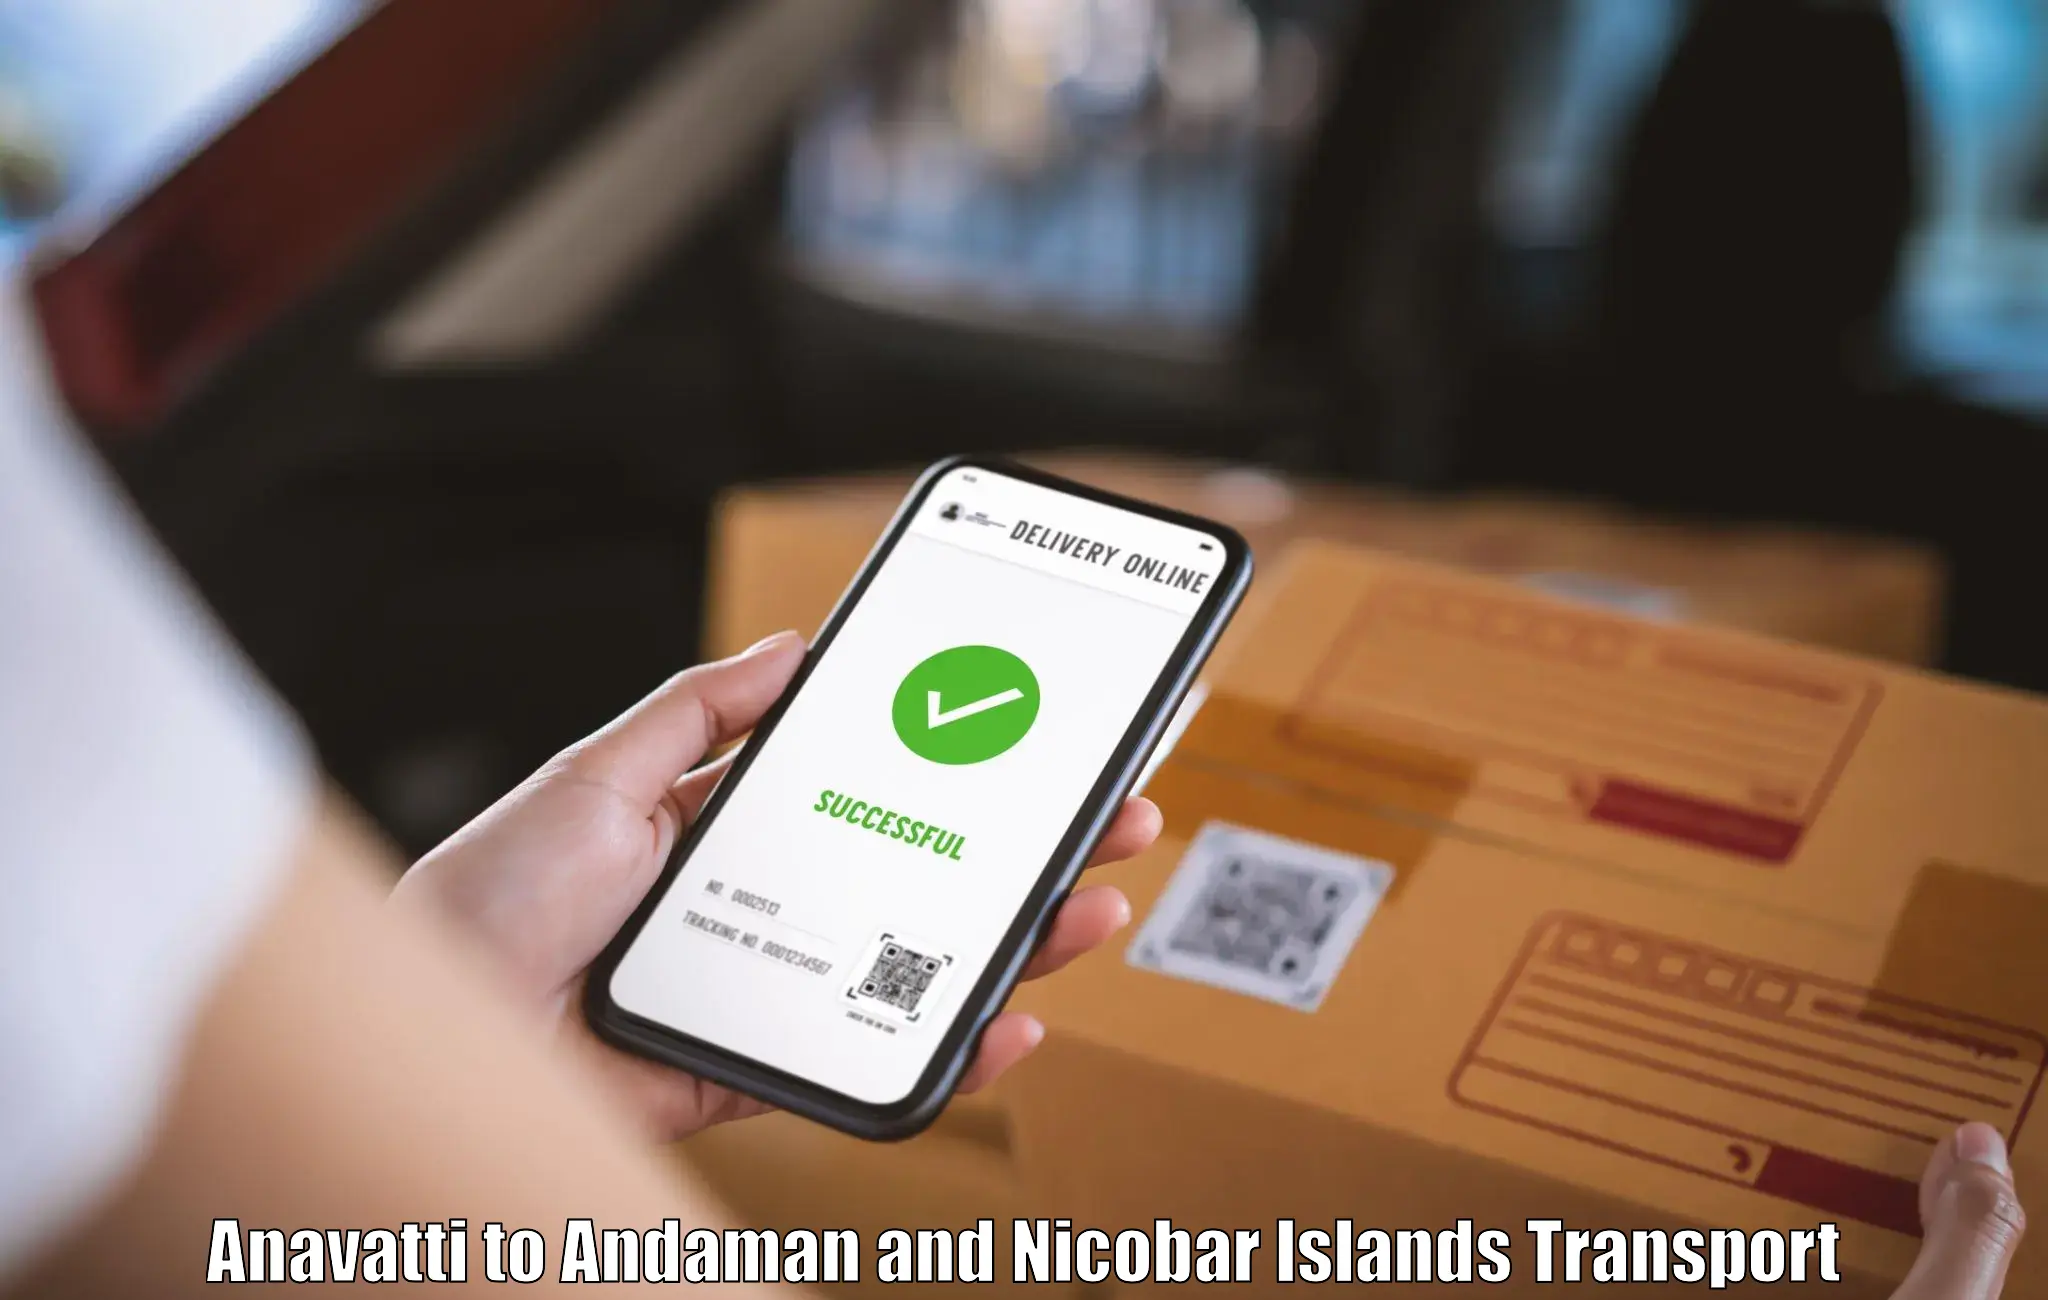 Pick up transport service Anavatti to North And Middle Andaman